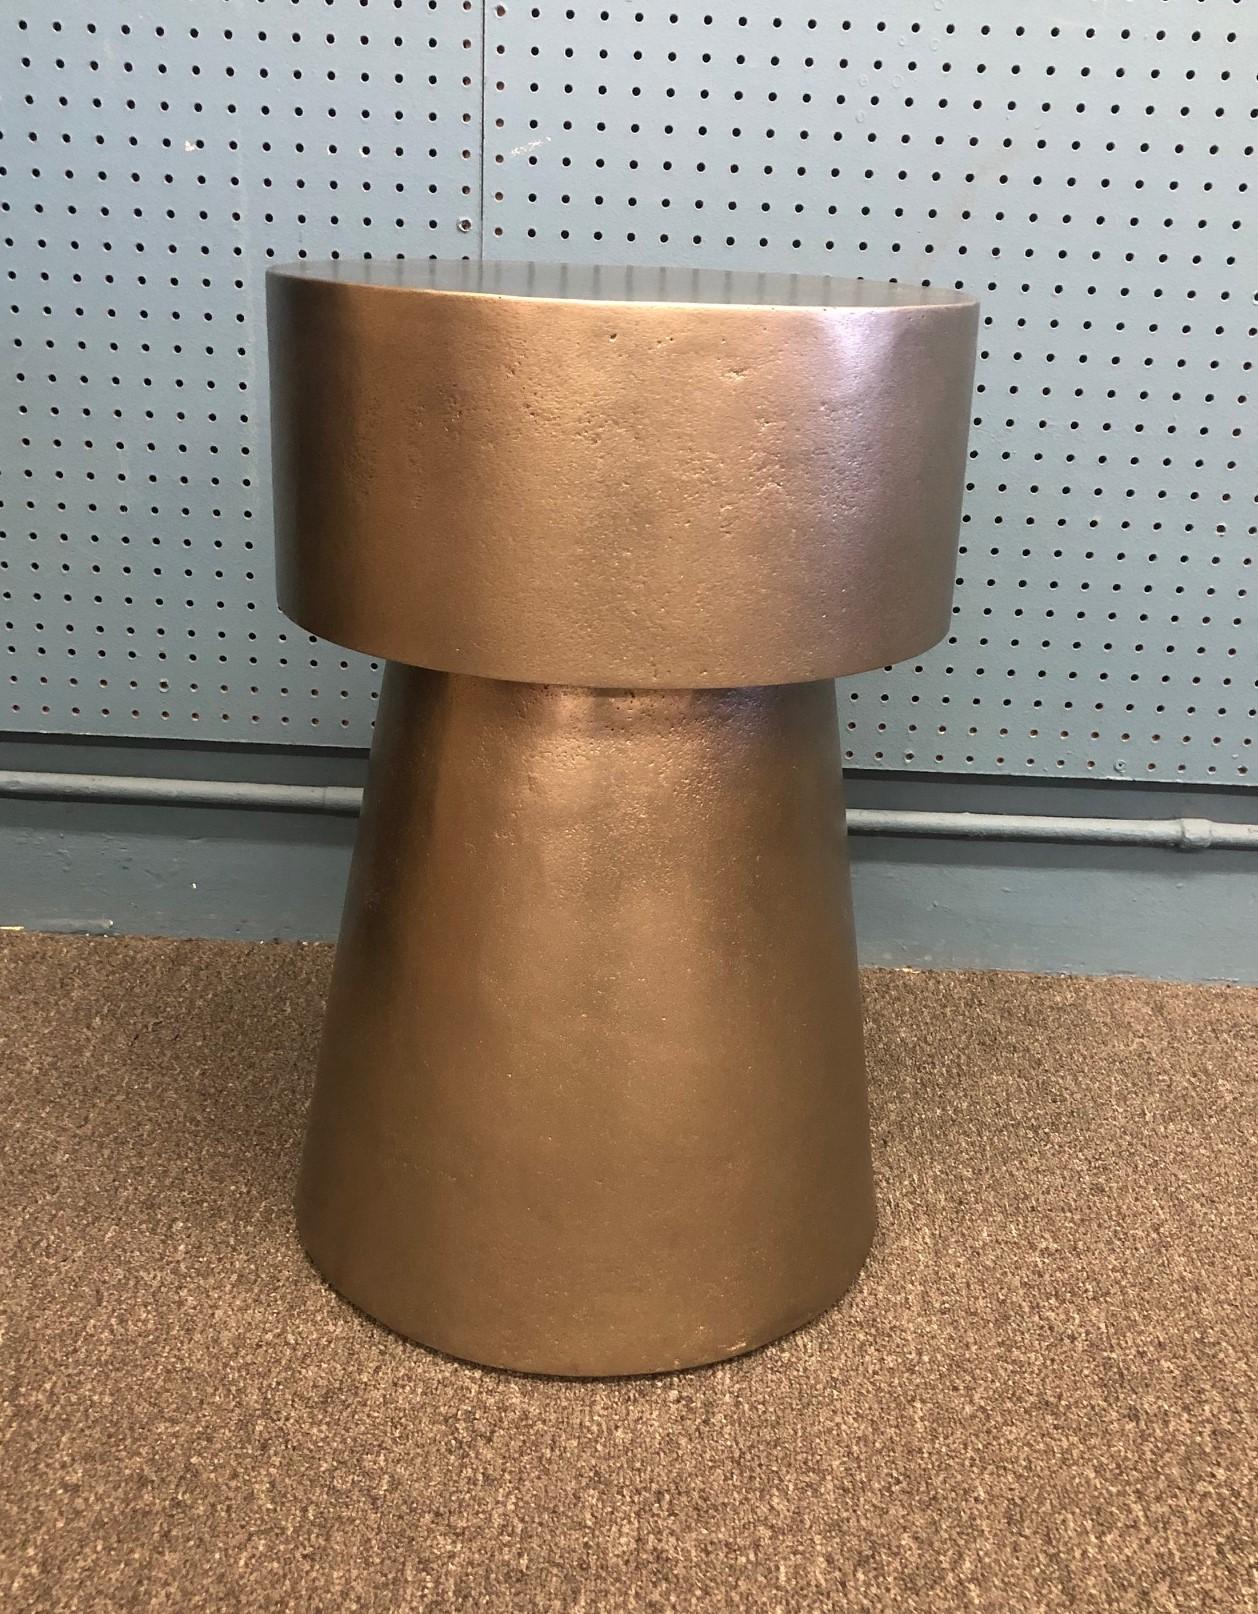 Aluminum clad round pedestal side table by Bernhardt in excellent condition.